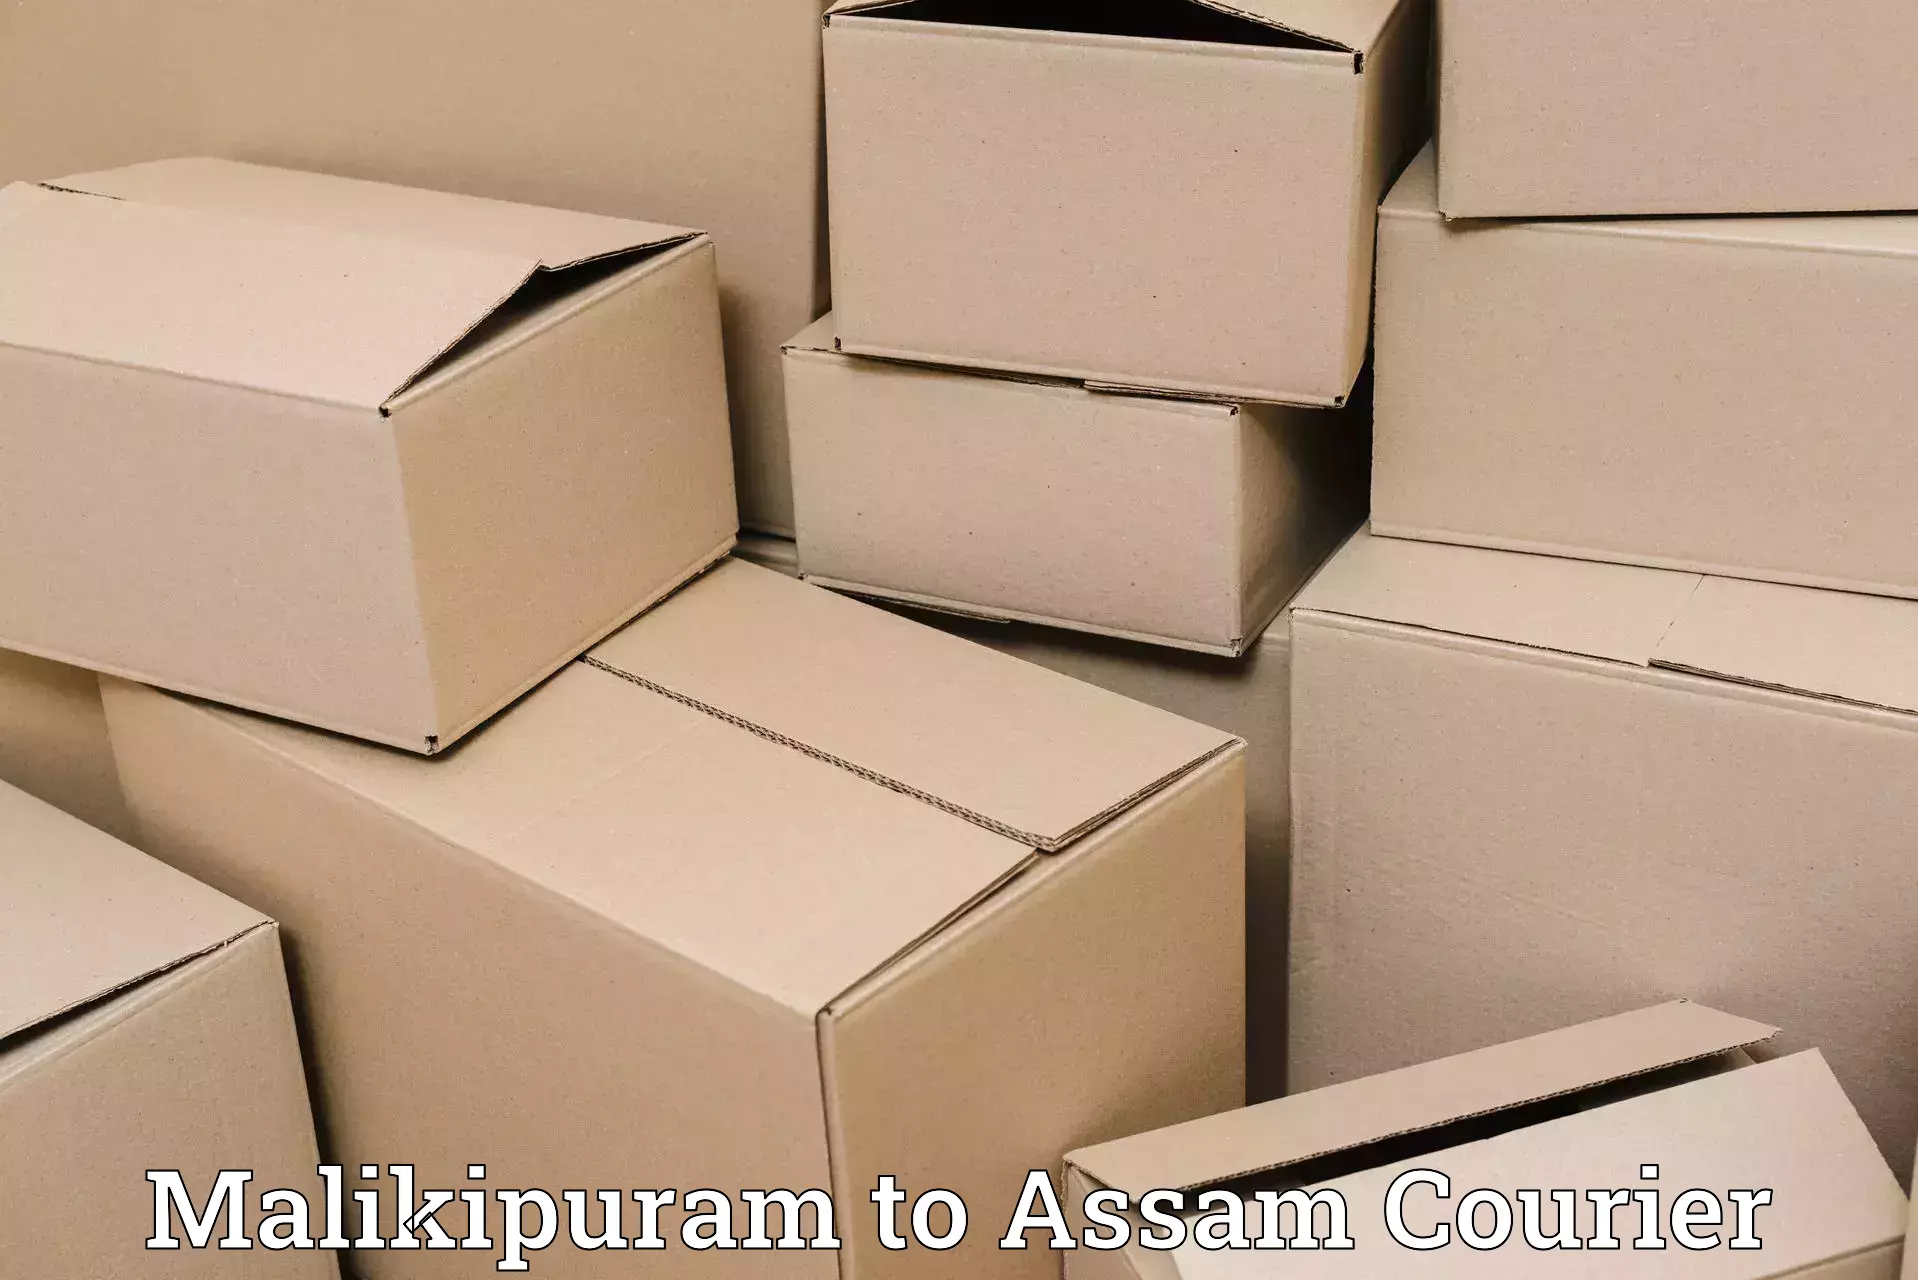 Package delivery network Malikipuram to Assam